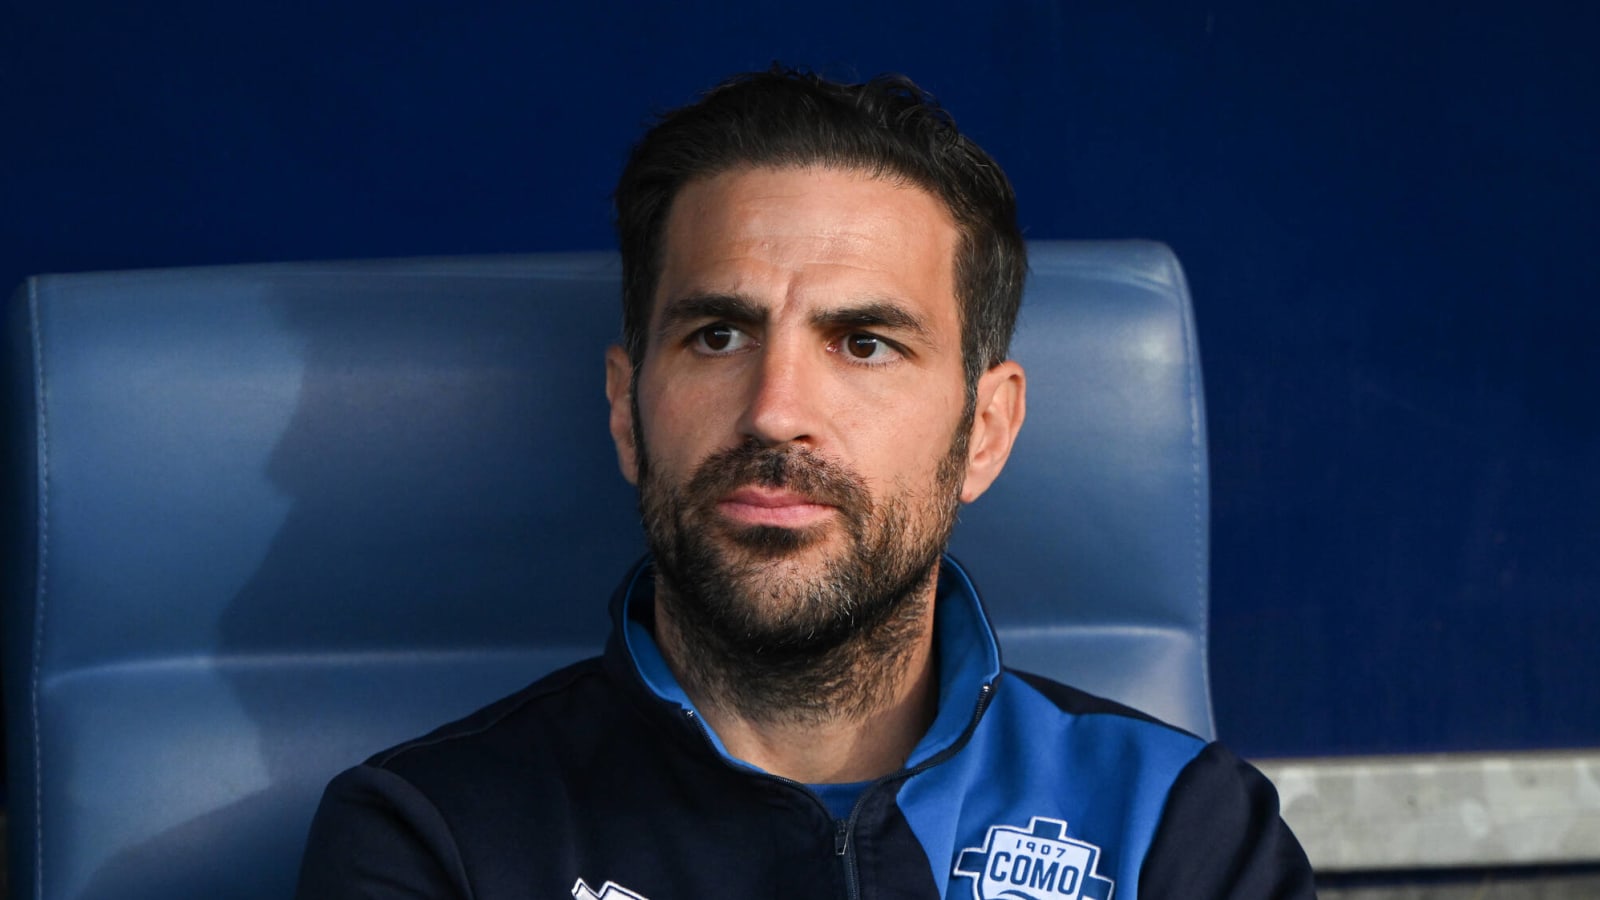 Cesc Fabregas explains 'the most important thing' that a manager needs